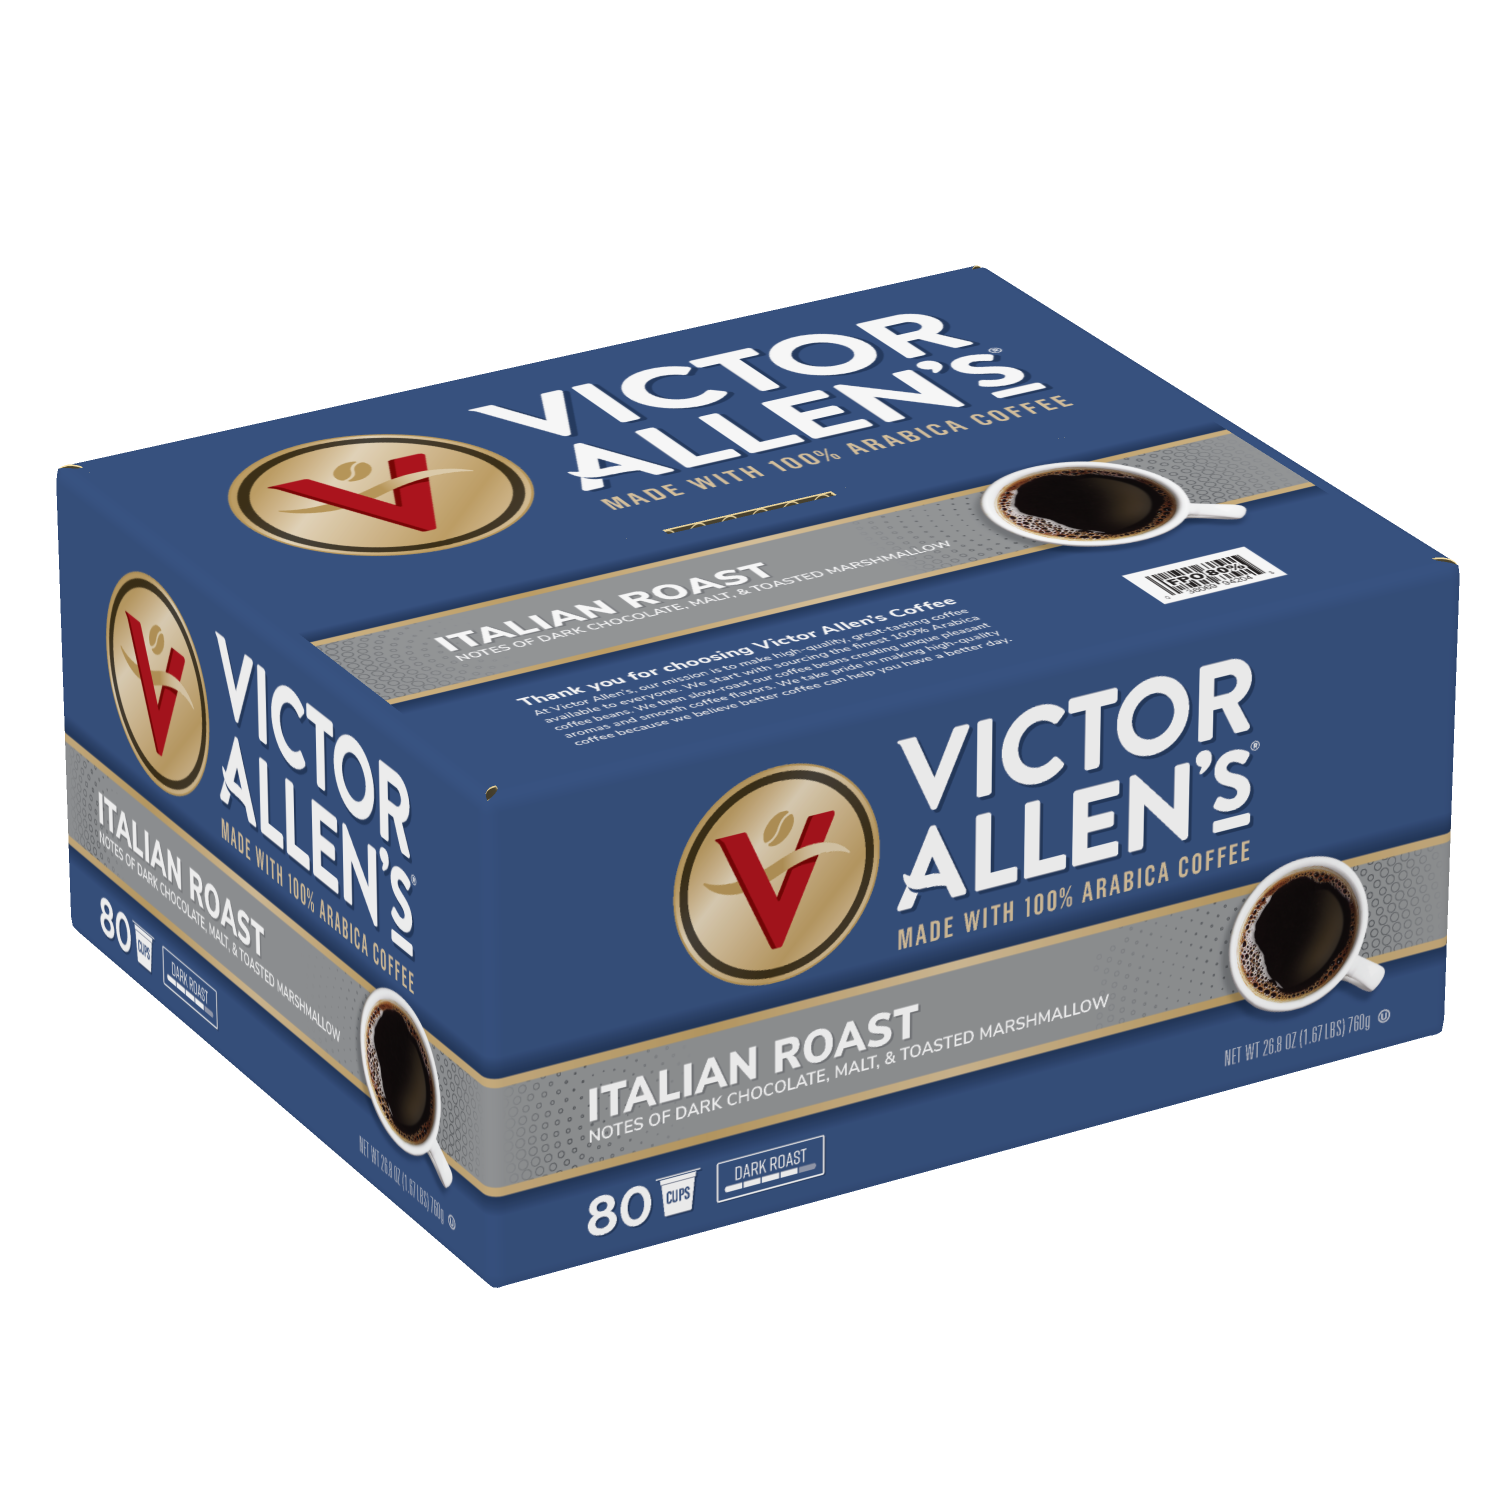 Victor Allen's Coffee Favorites Variety Pack Single Serve Coffee Pods for Keurig K-Cup Brewers 200 Count